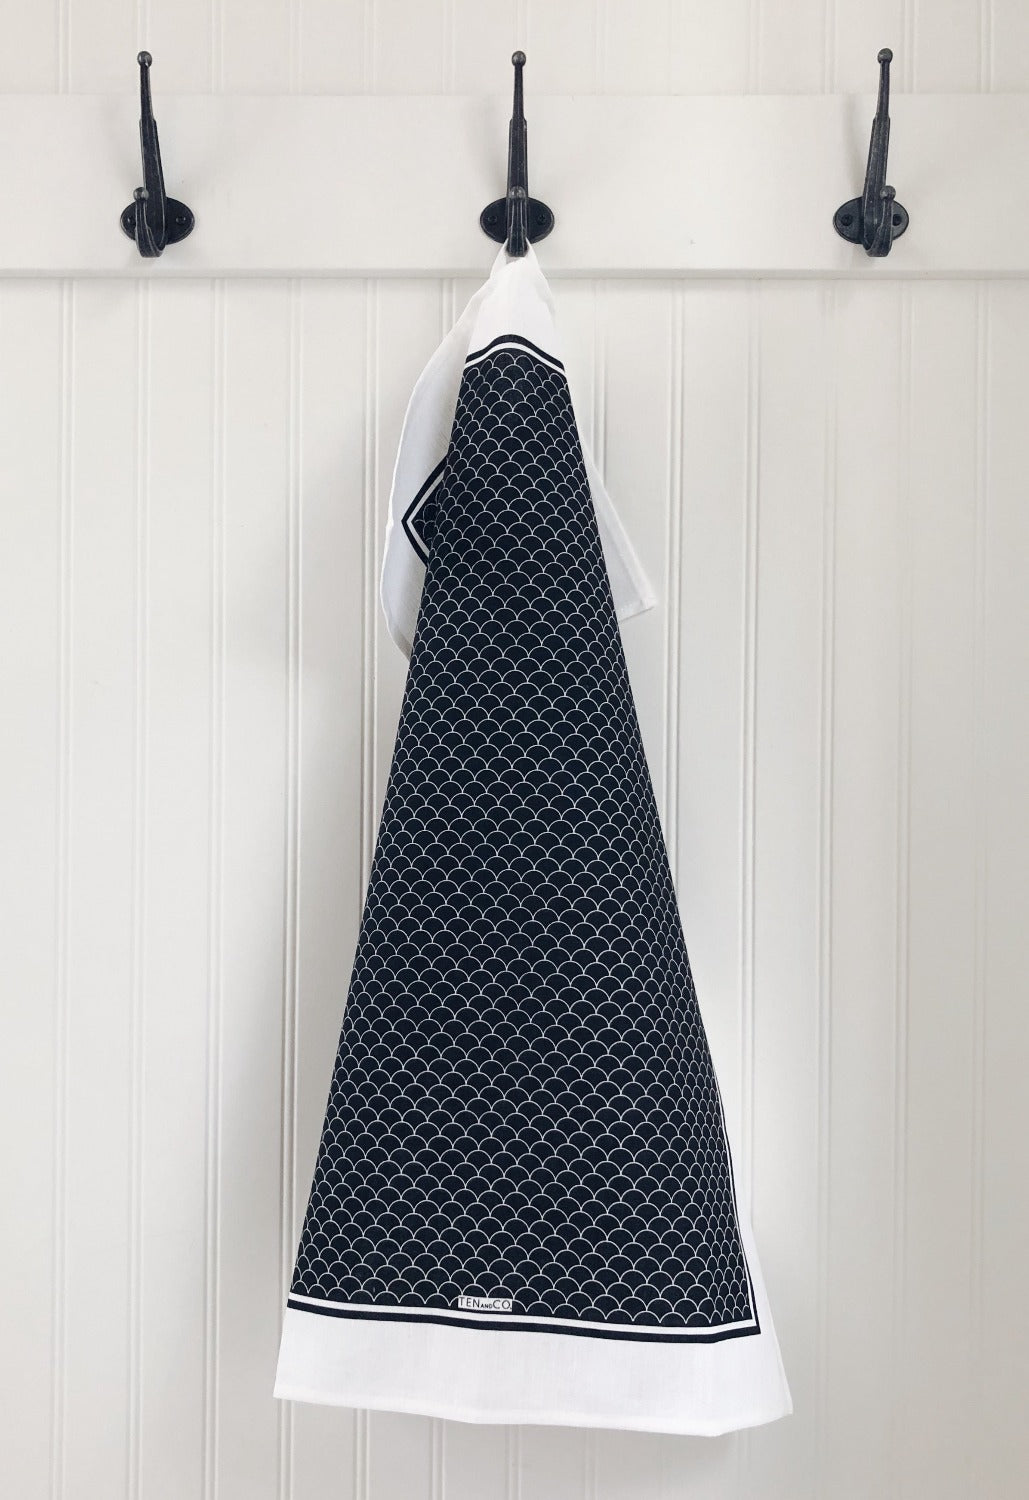 Product image of Scallop Black gift set. In this image there are 3 black hooks on a white wood paneled wall. On the center hook is a full view of the Scallop Black tea towel. It has a white base with a black background and white scallops throughout. 